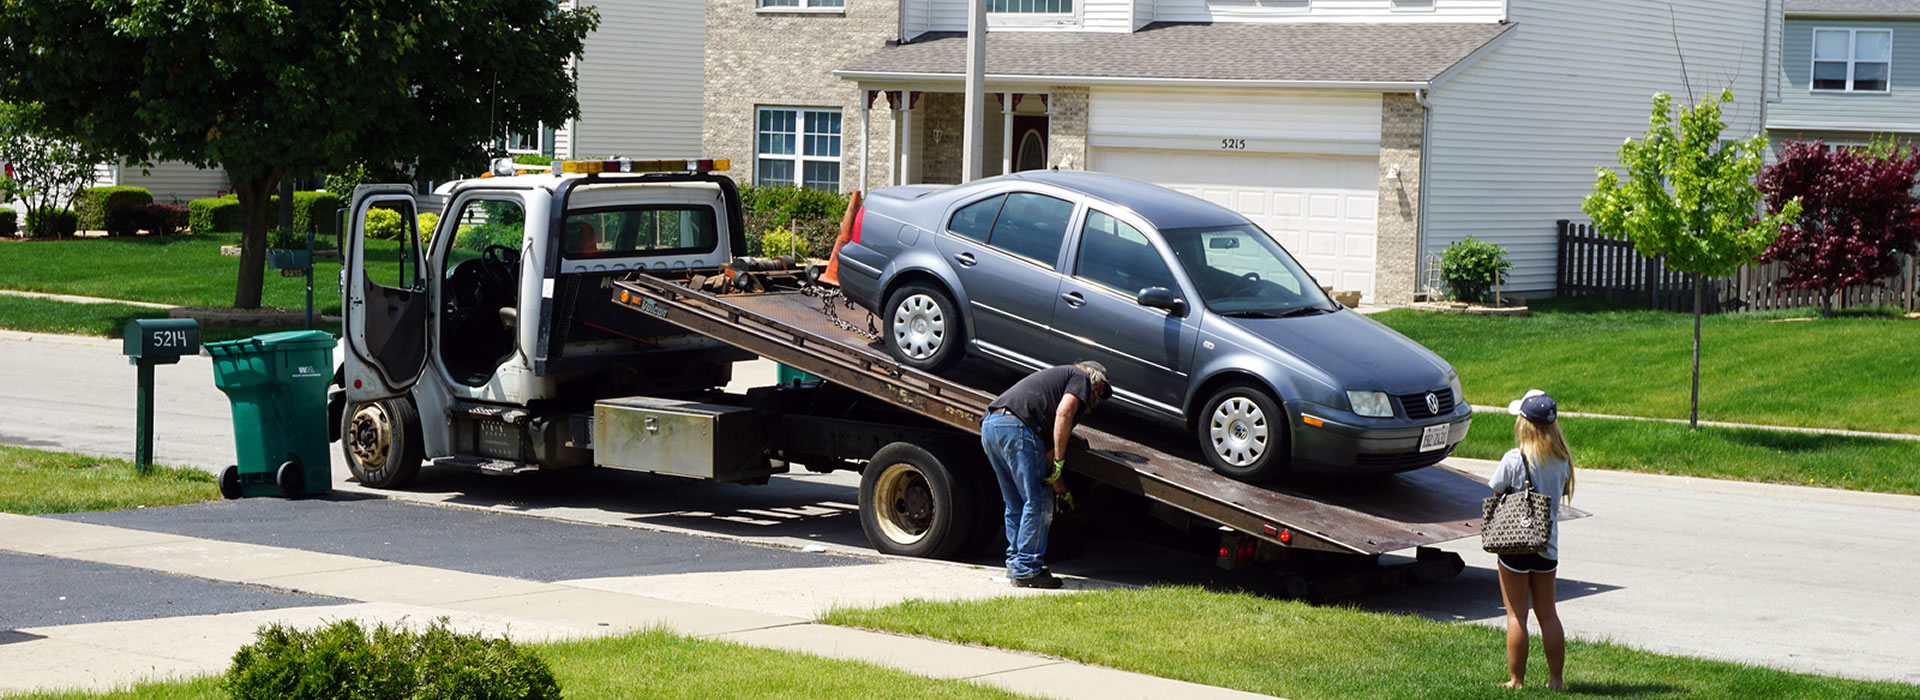 How can I get towing insurance?